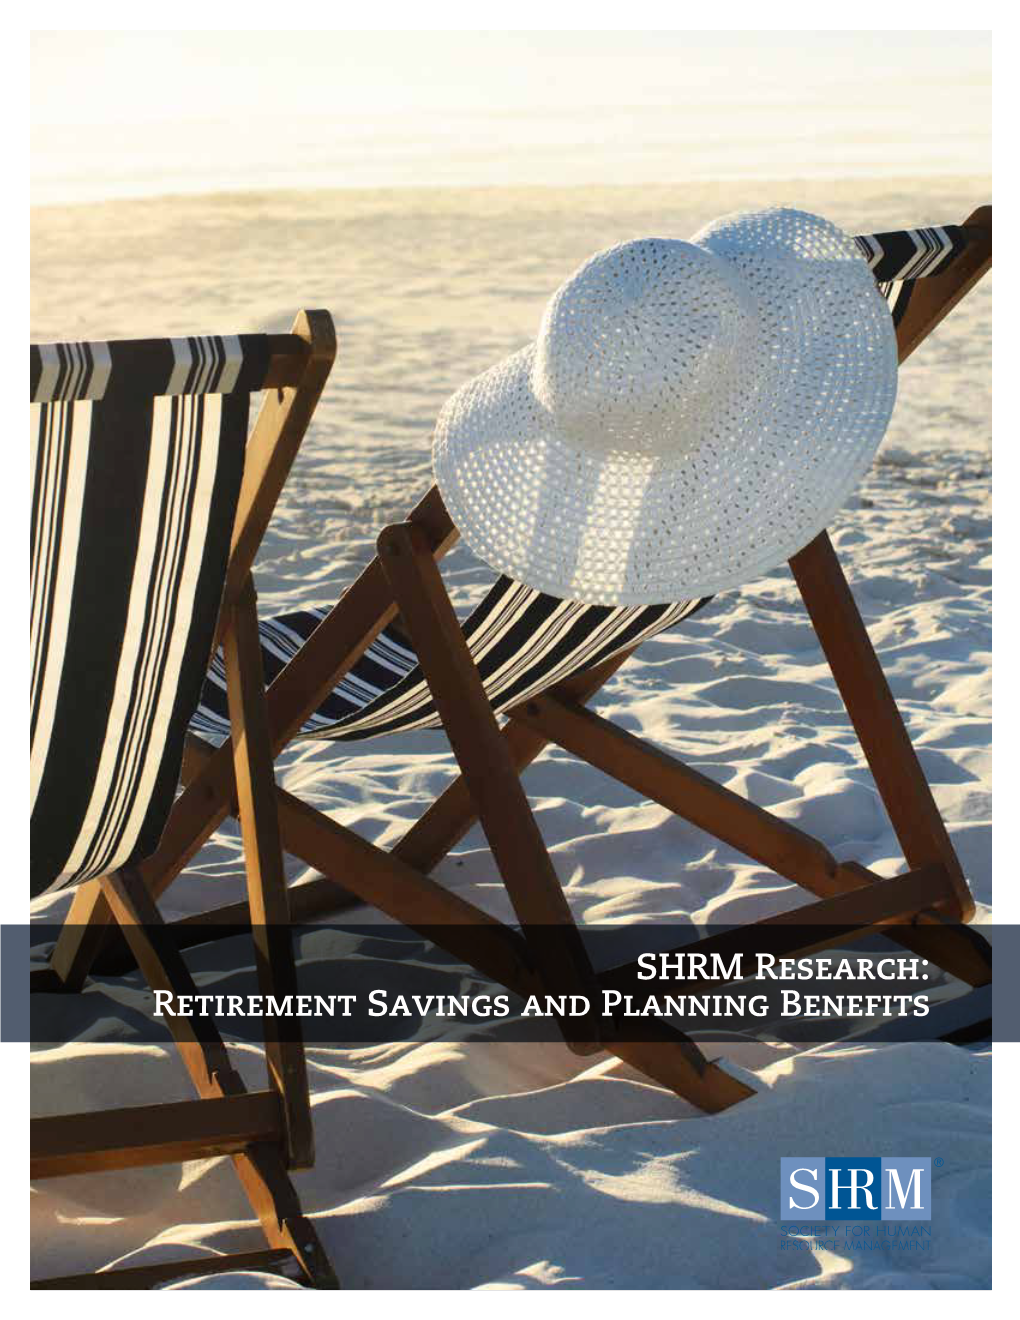 SHRM Research: Retirement Savings and Planning Benefits SHRM Research: Retirement Savings and Planning Benefits